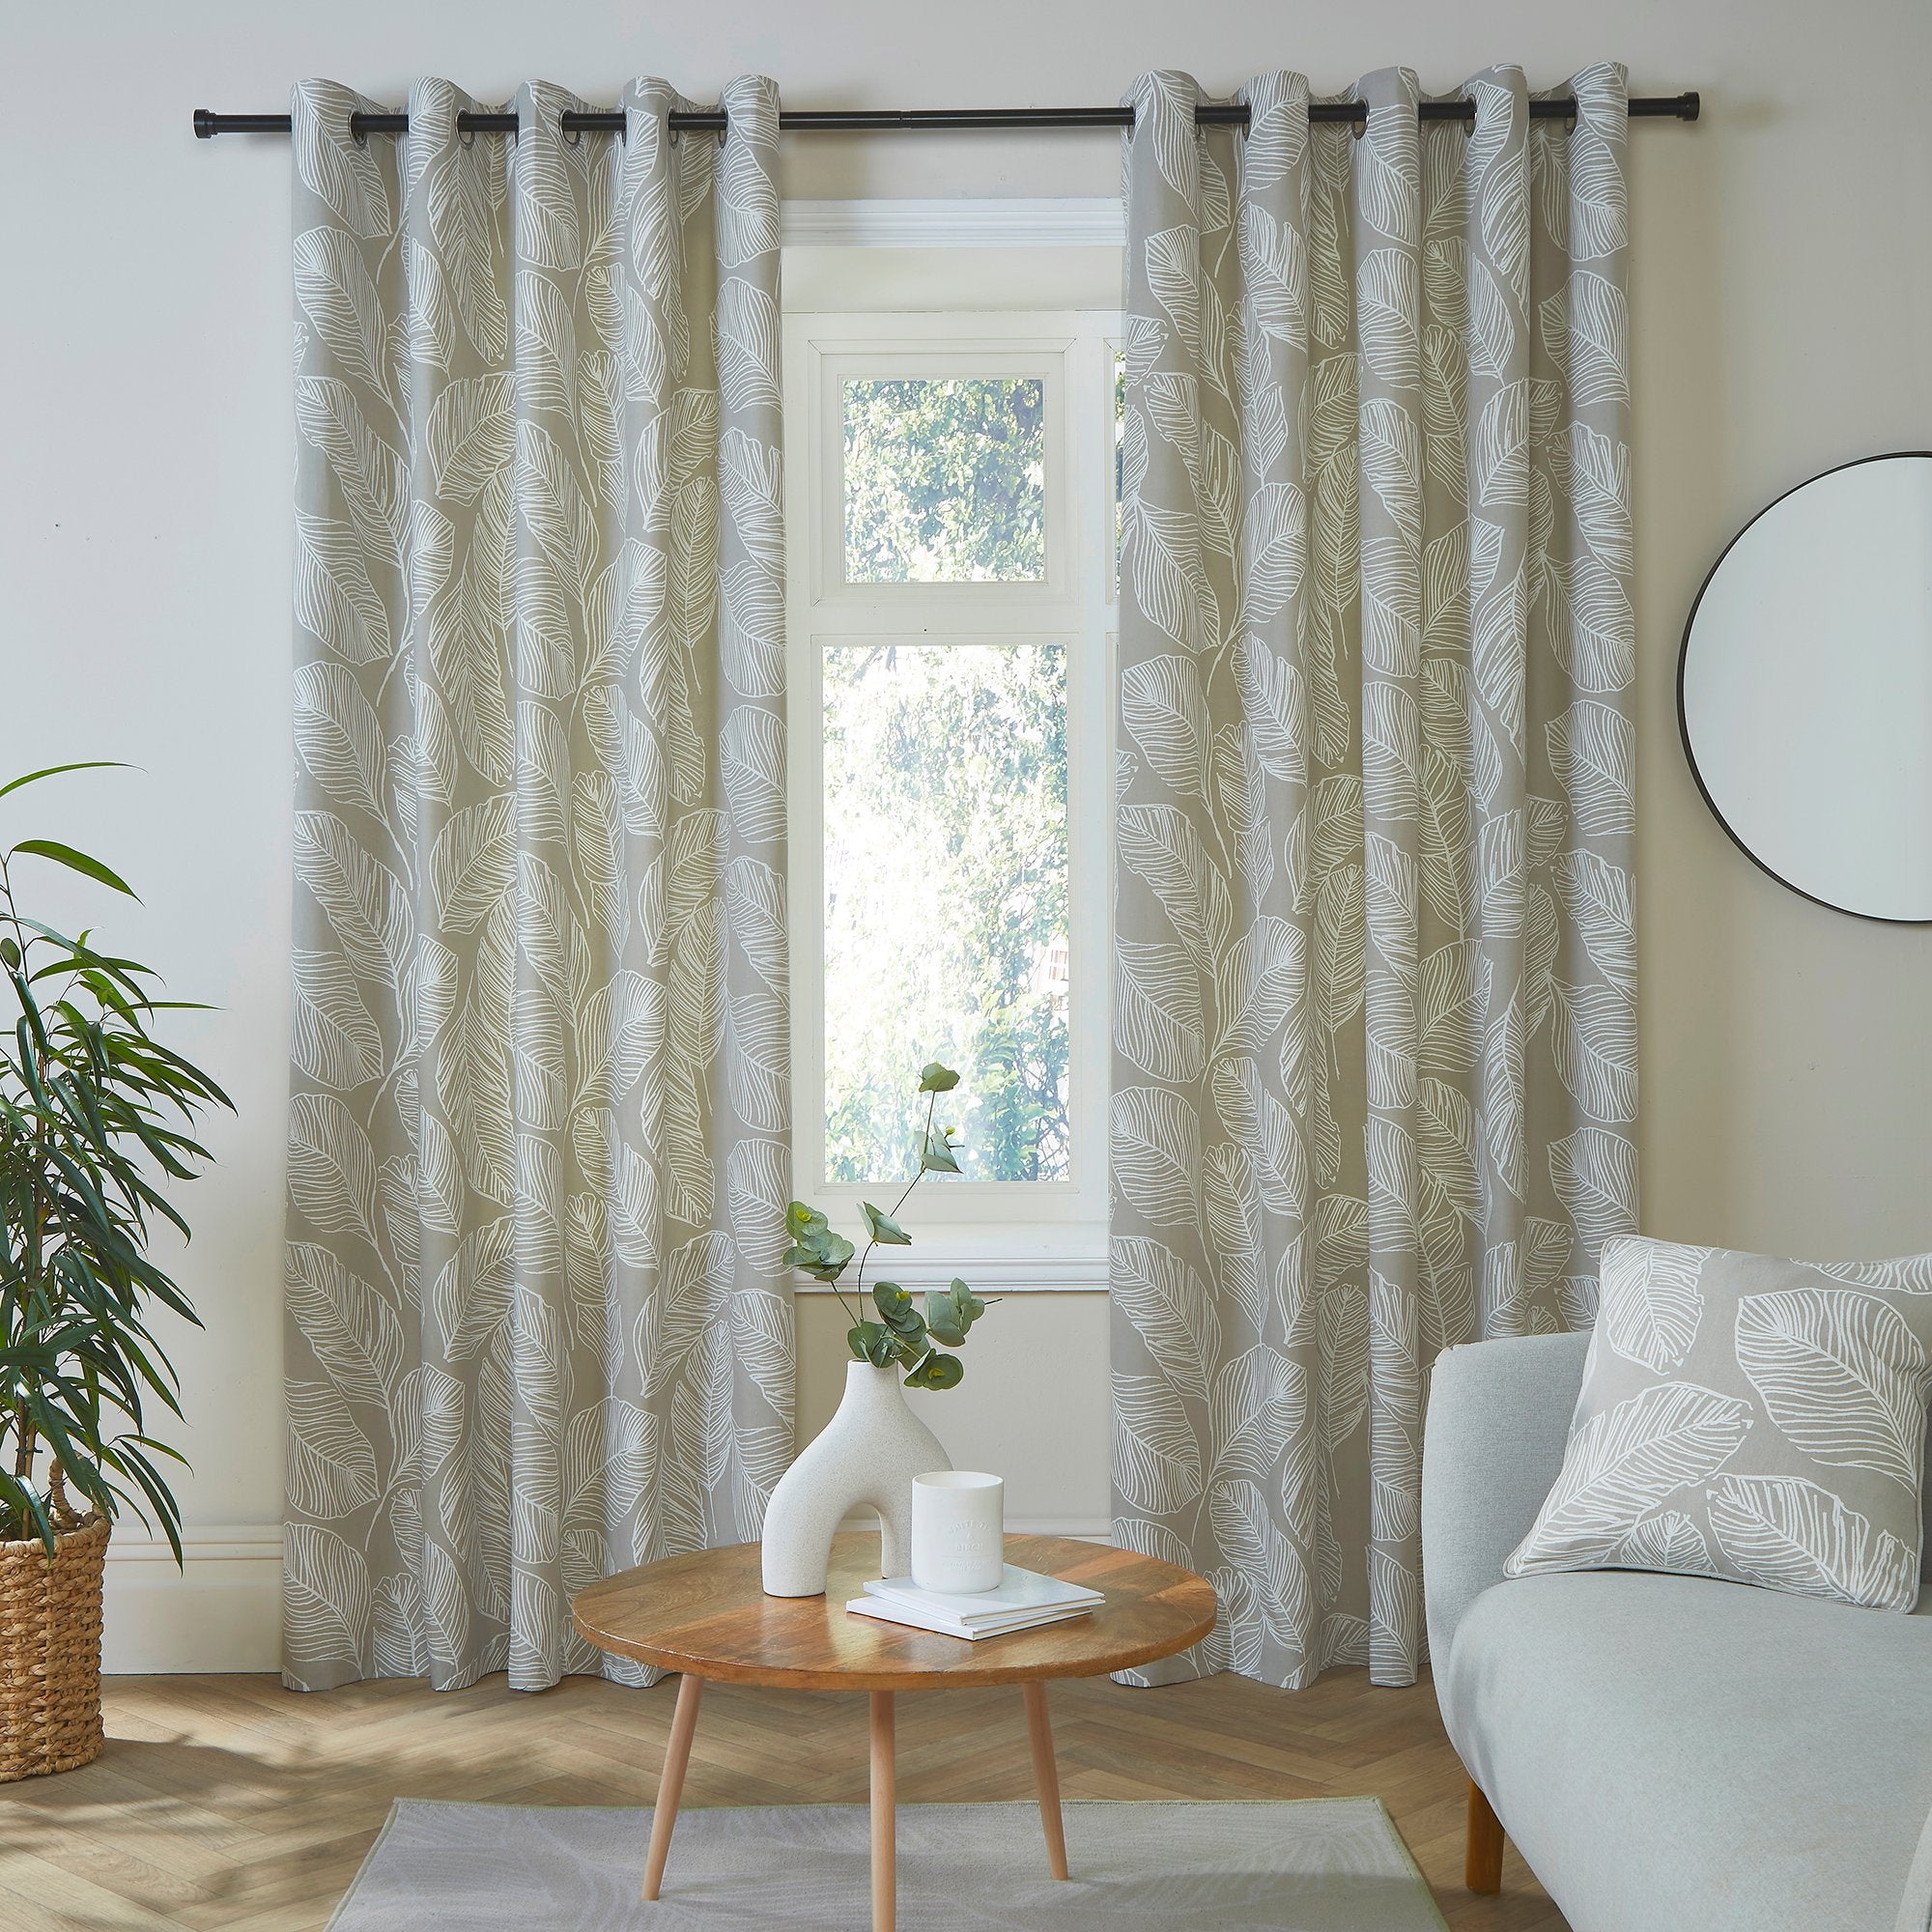 Pair of Eyelet Curtains Matteo by Fusion in Natural